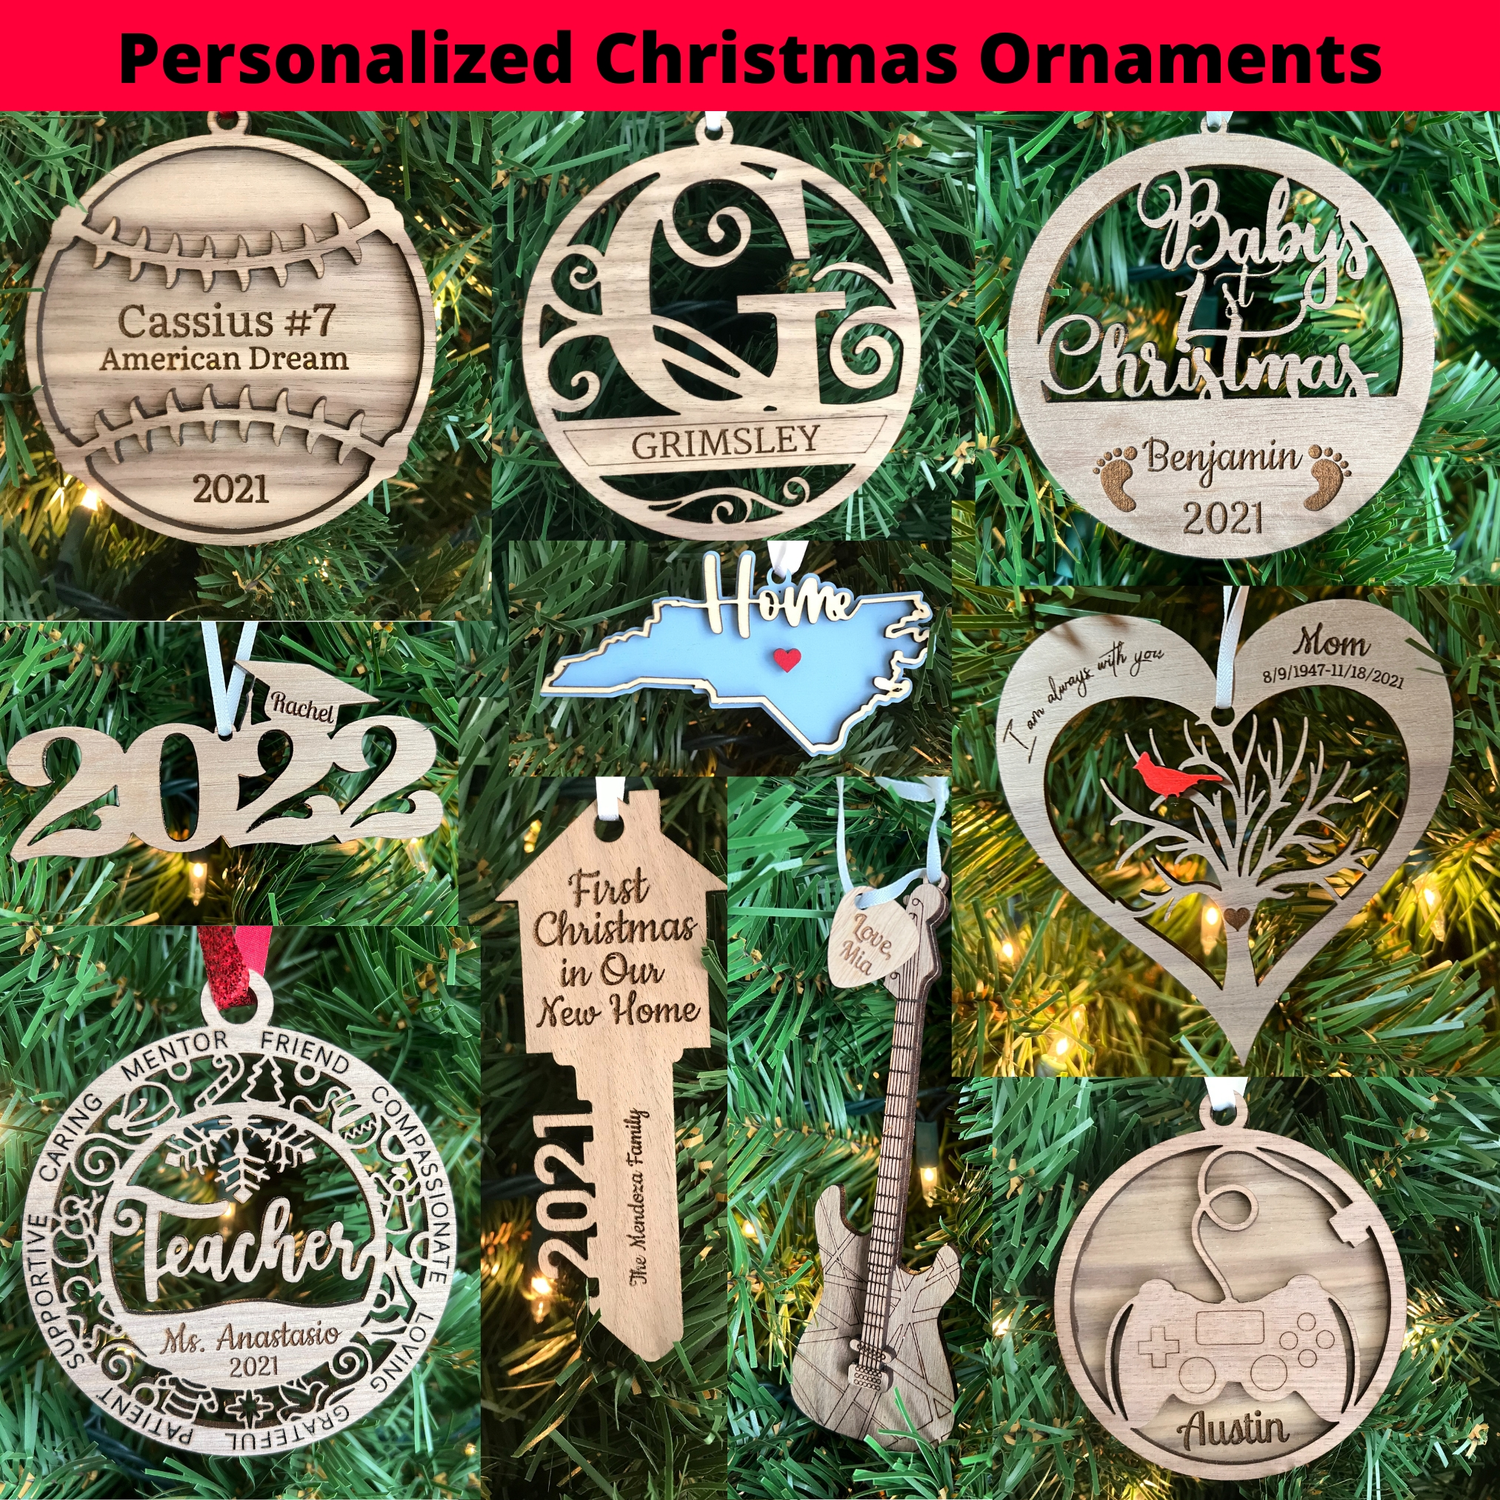 Shop Personalized Christmas Ornaments!